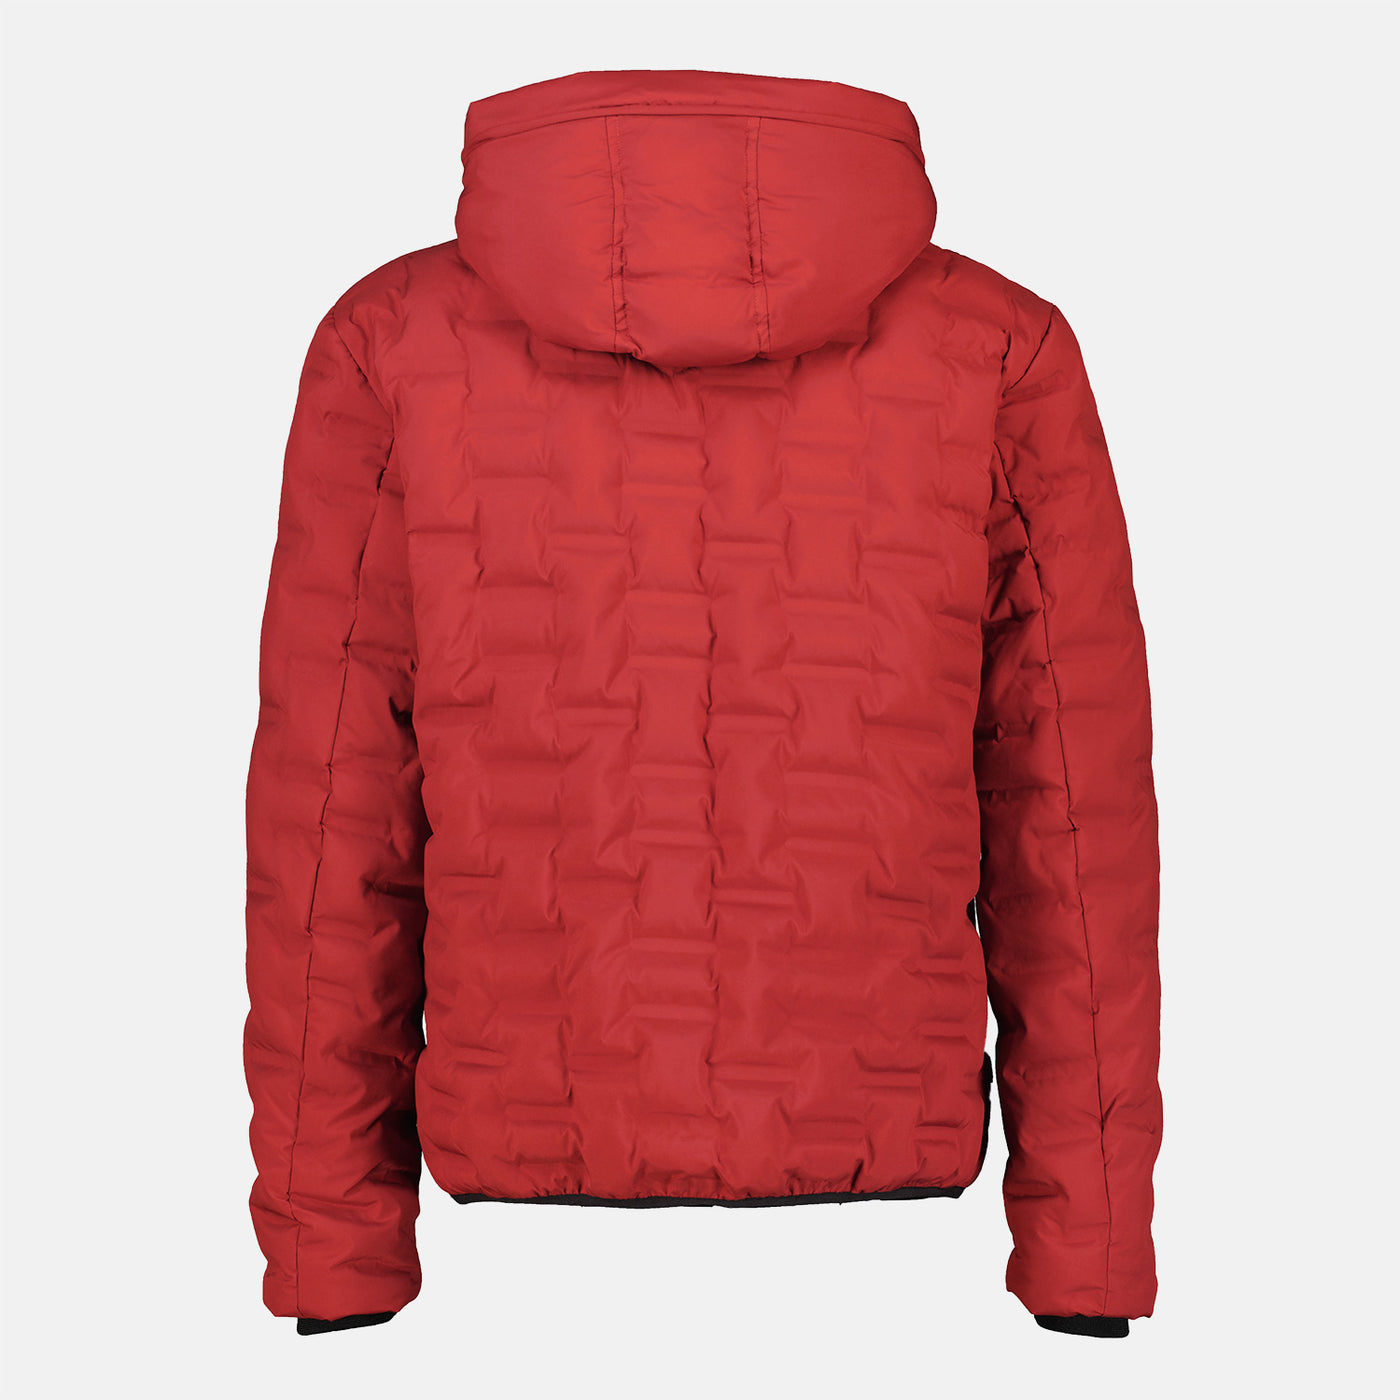 Hooded quilted jacket